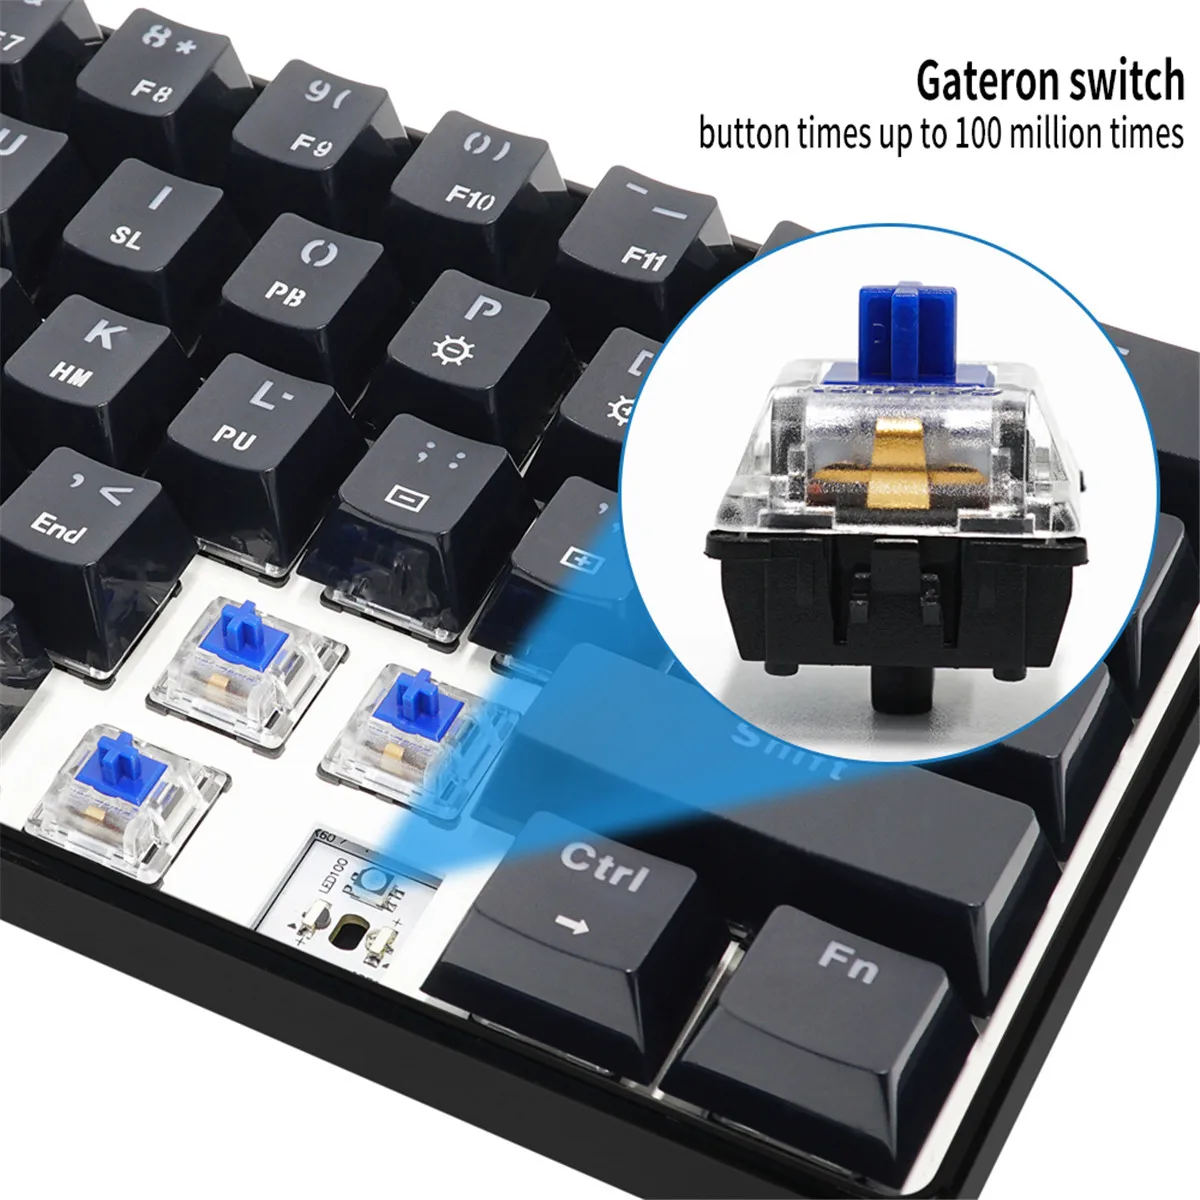 

HOT Axis 61 Key Games Gateron Switch RGB Game Mechanical Keyboard Optical Axis Can USB Type-c Be Inserted Cable Mechanical IP68